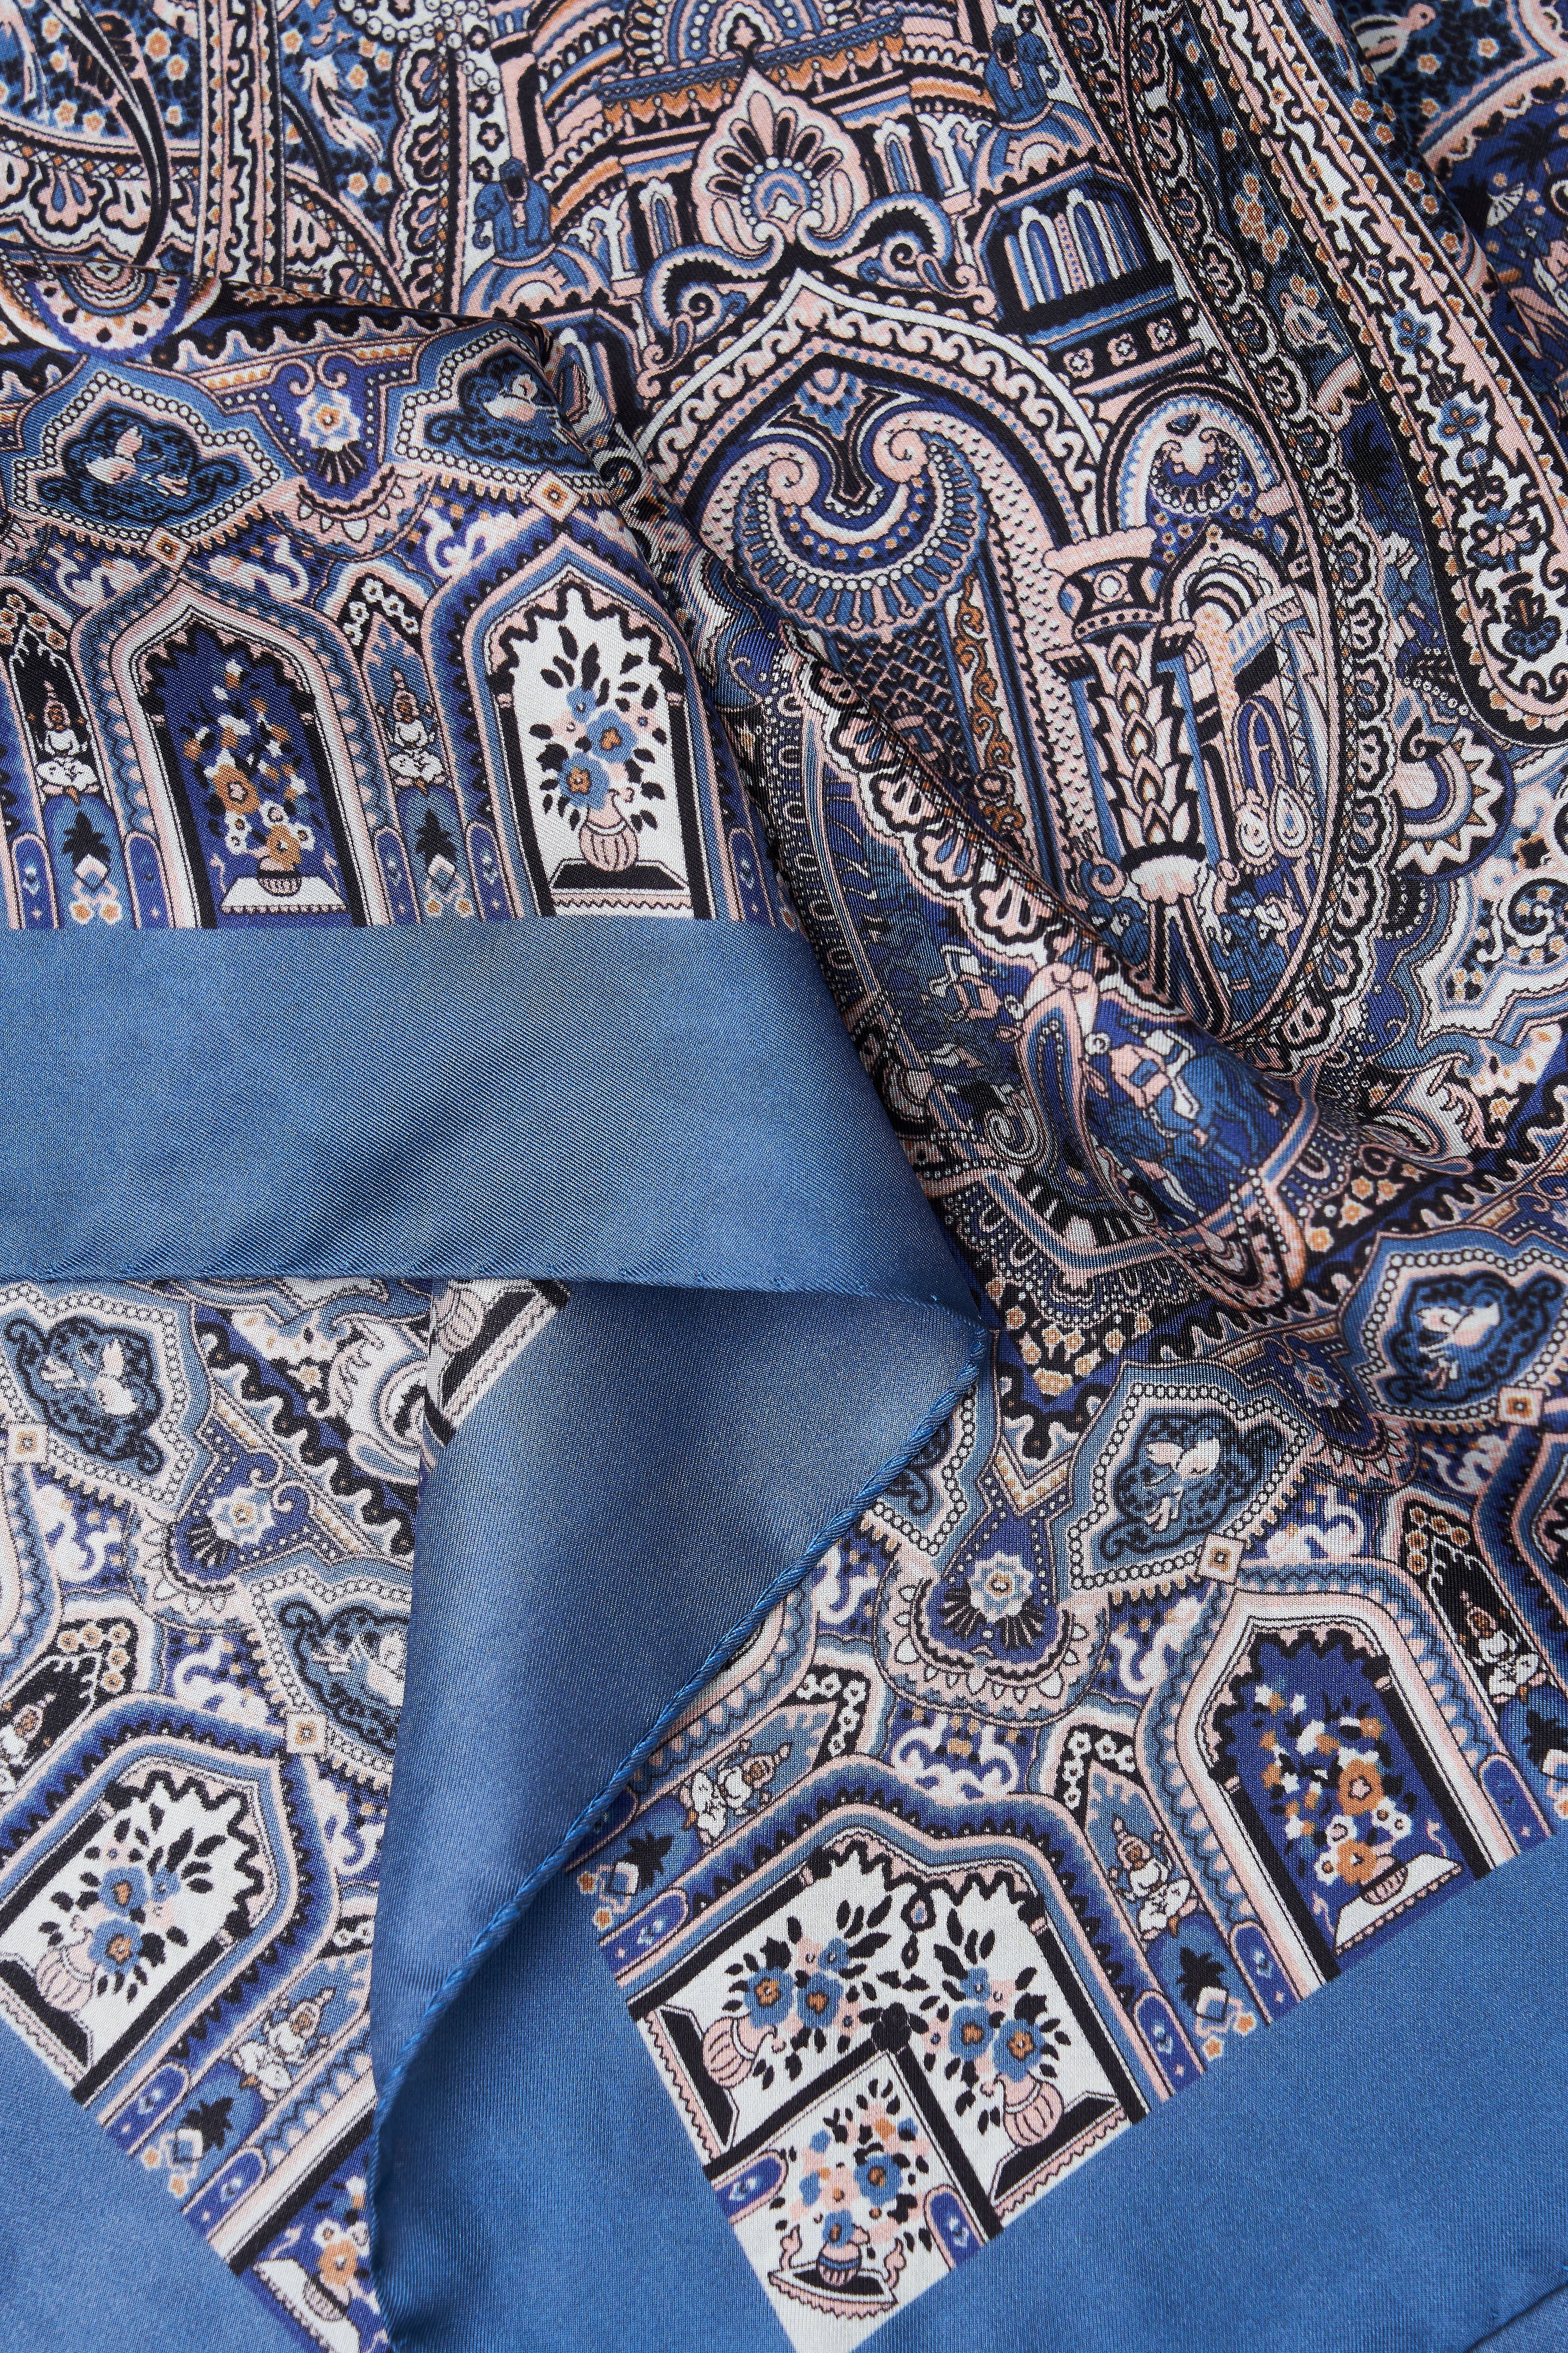 100% SILK PRINTED SCARF WITH BLUE FRAME